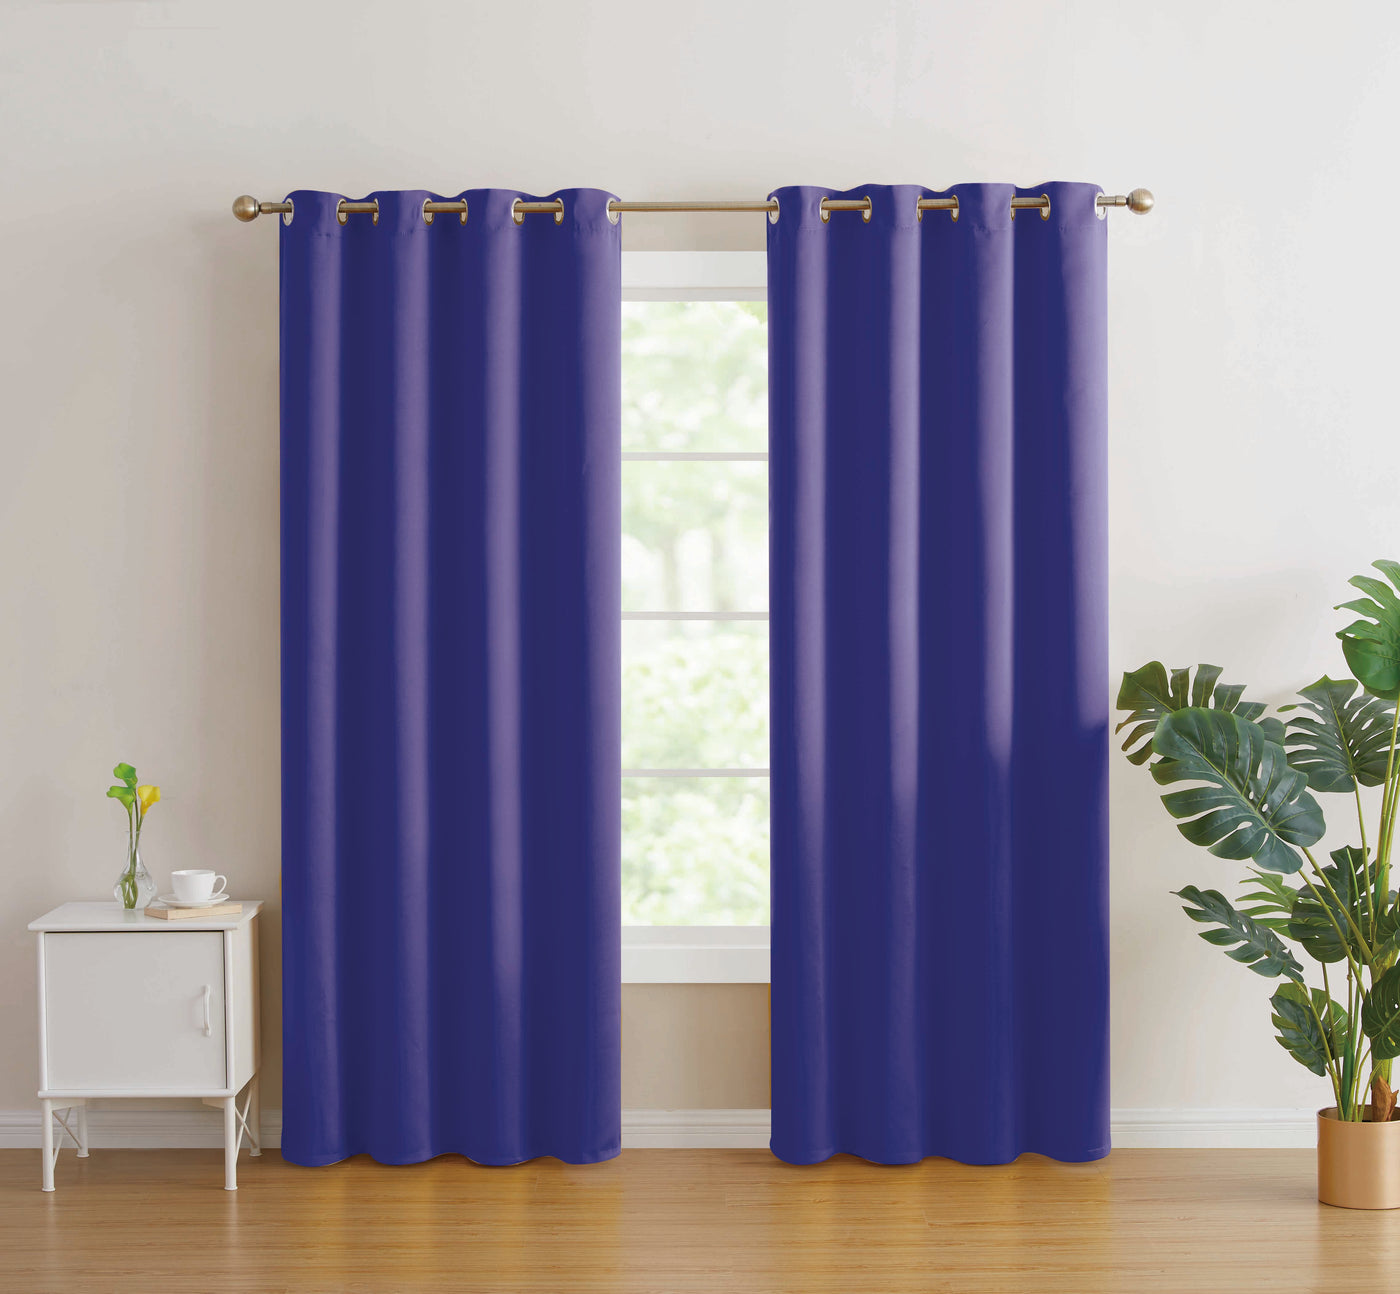 2pc Solid Grommet Thermal Insulated Window Curtain Panels Room Darkening Blackout 84" | Jenin Home Furnishing.